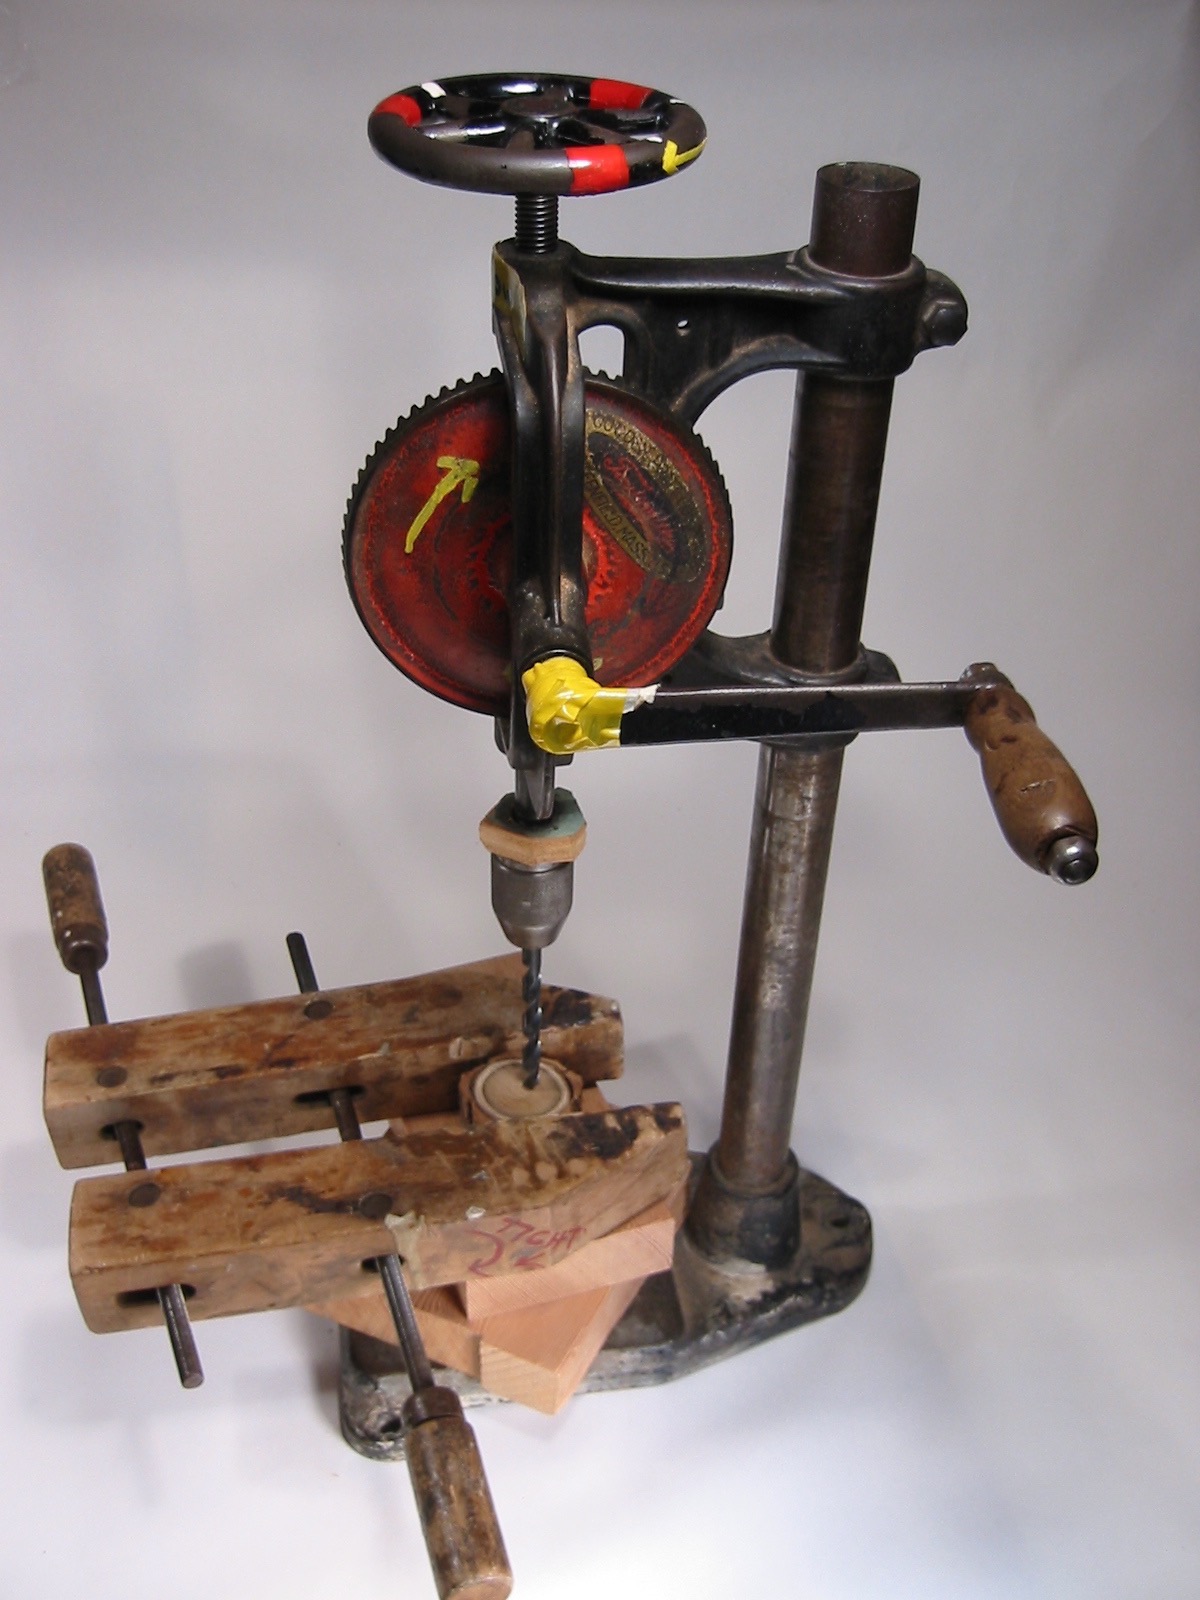 Converting A Hand Powered Drill Press To Electrical Model Engineer ...